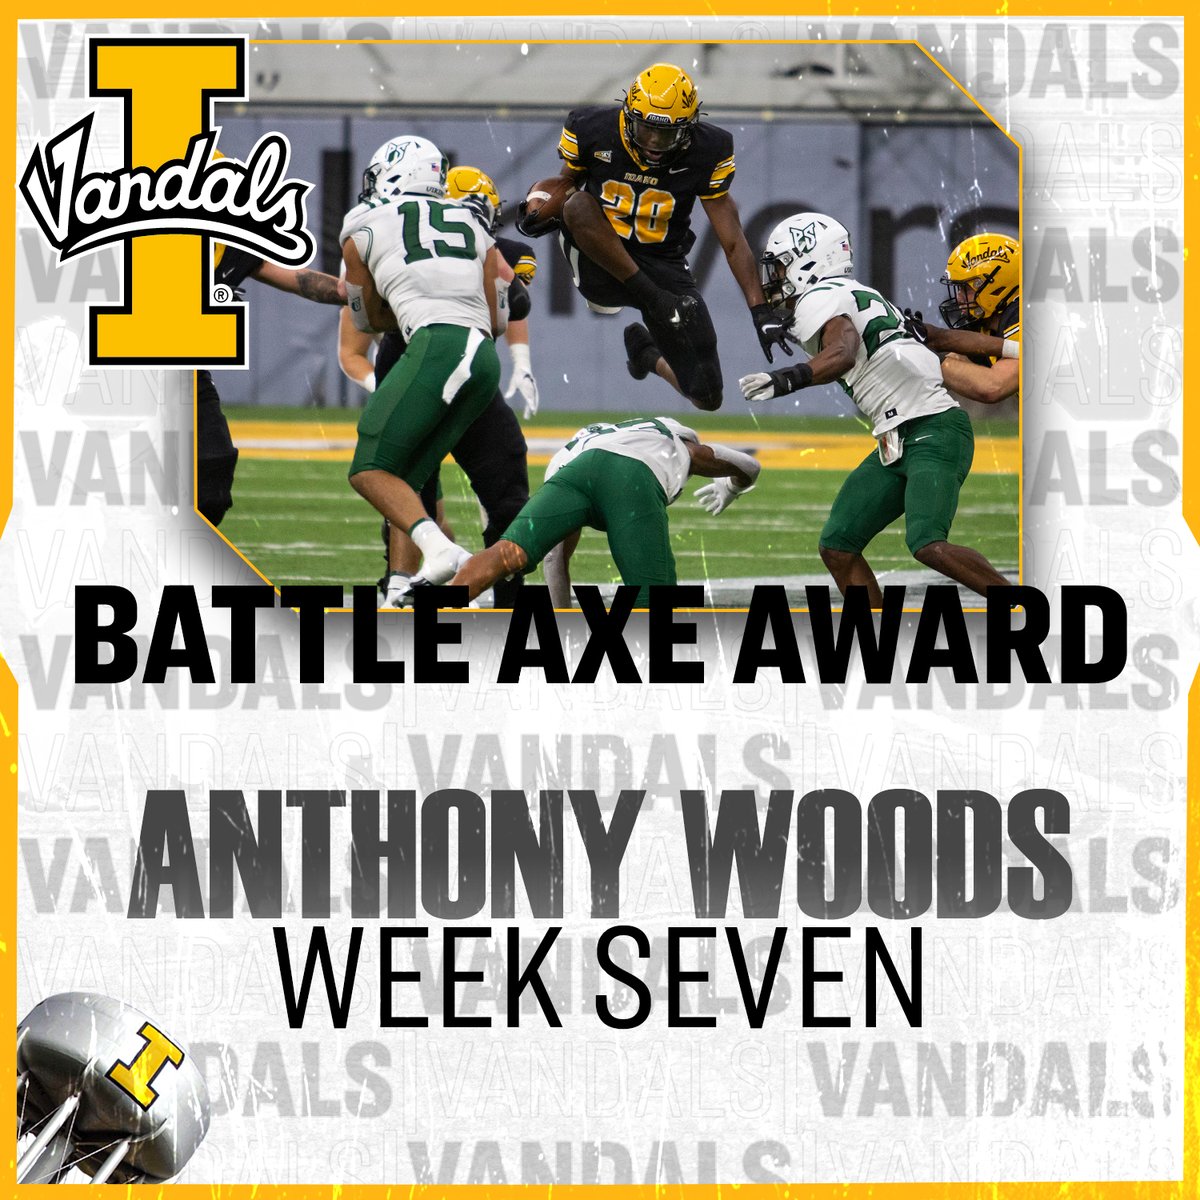 The Vandals have now won five straight games! Time for the Players of the Week for Saturday's win over Portland State! We start with the Battle Axe Award! This week's Battle Axe Award goes to @Anthony1_woods! #GoVandals